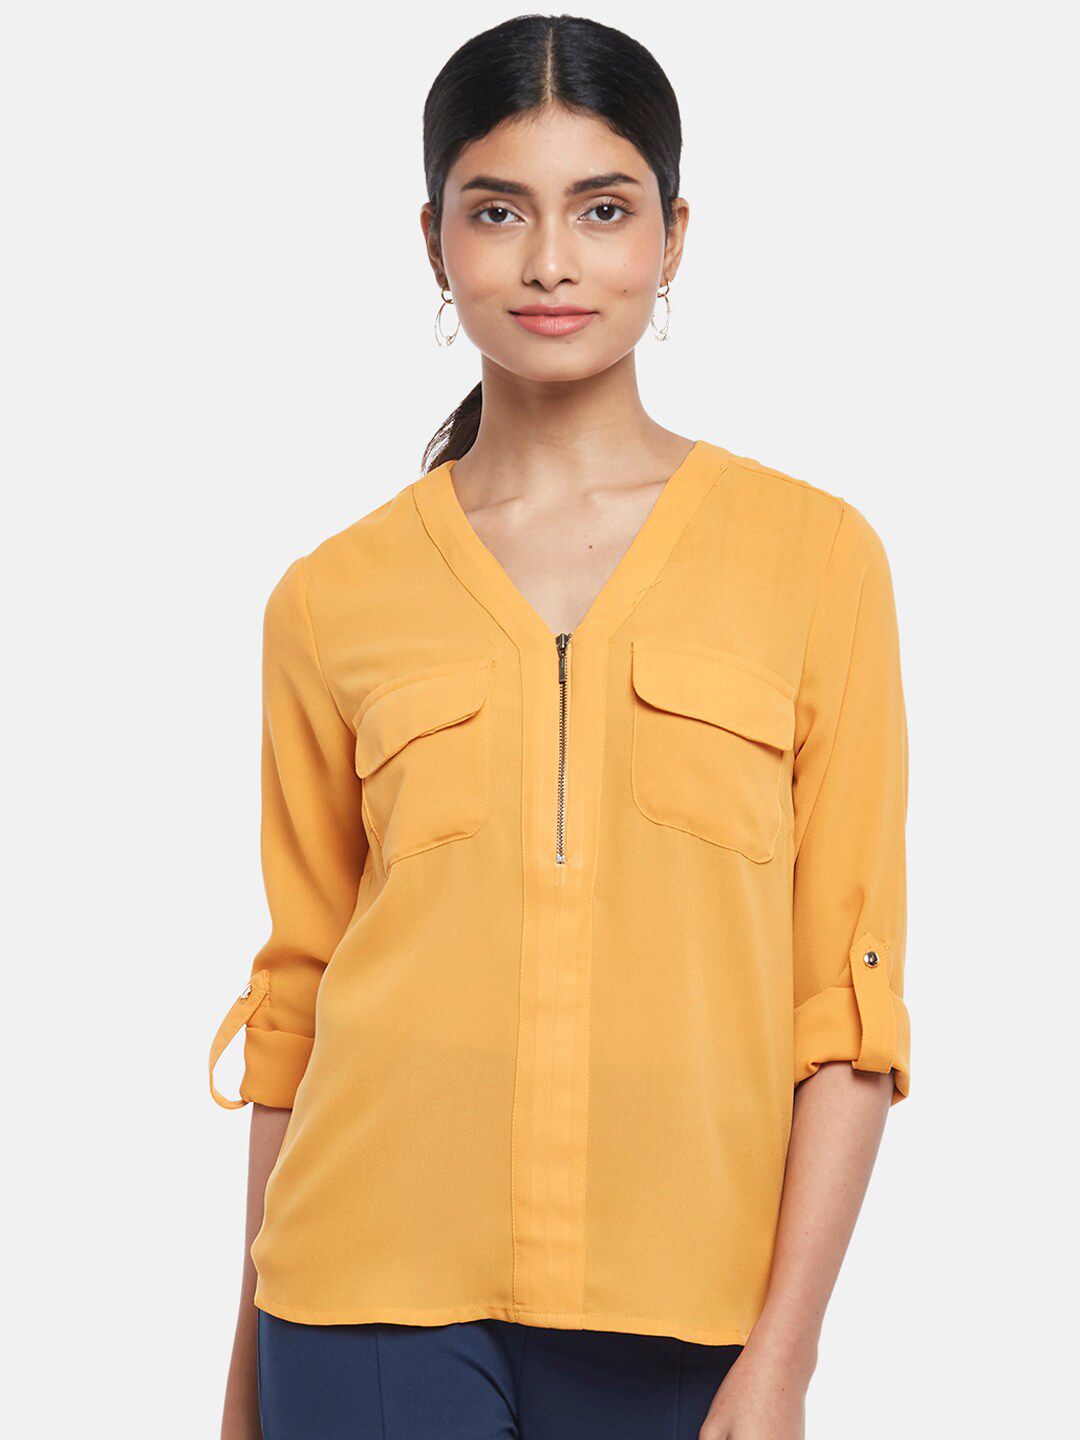 Annabelle by Pantaloons Mustard Yellow Roll-Up Sleeves Shirt Style Top Price in India